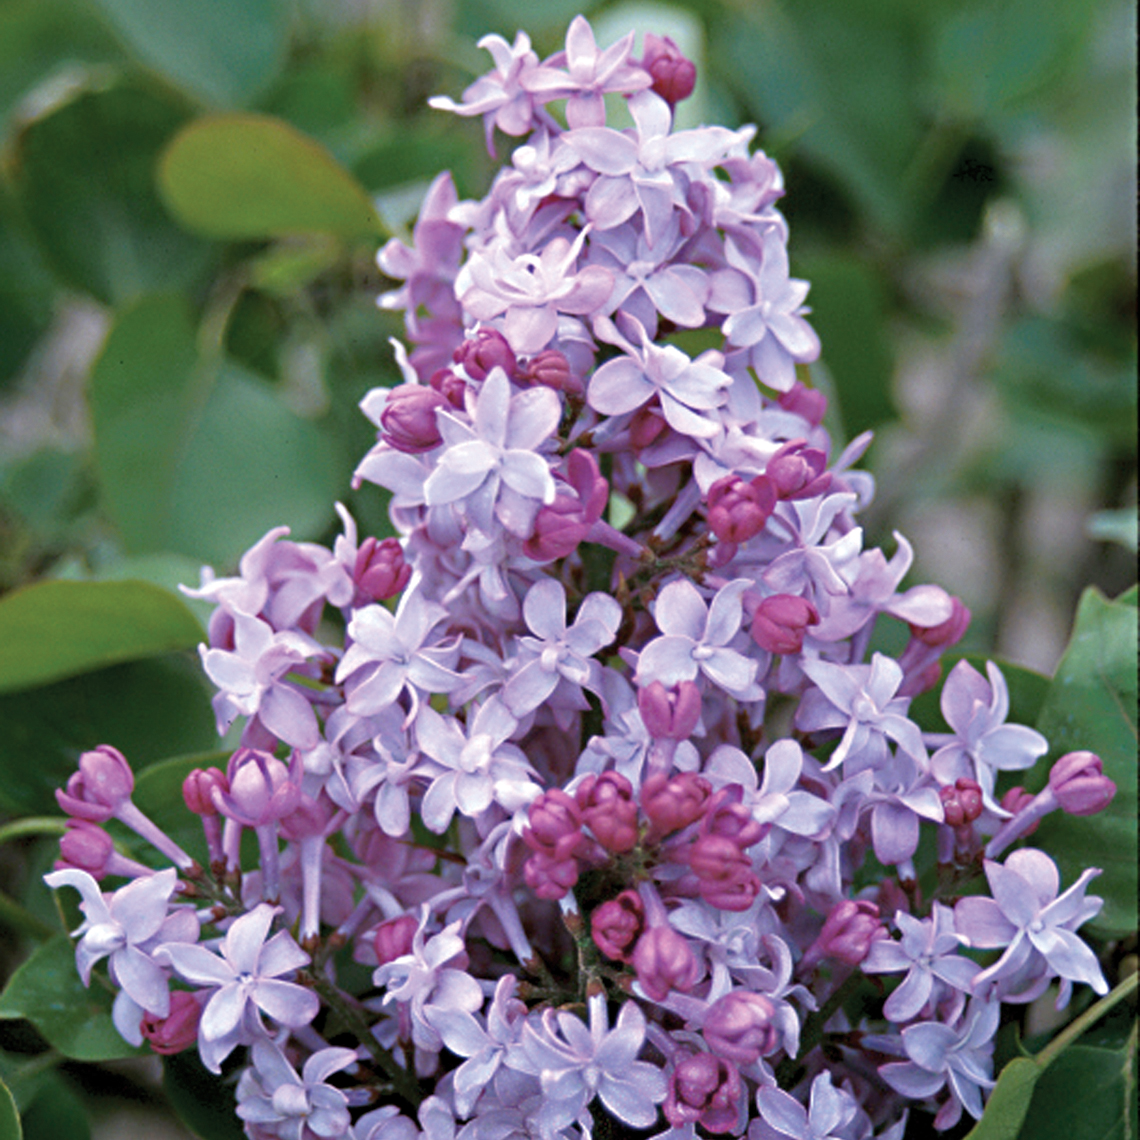 Closeup of the true lilac double blooms of Evangeline syringa